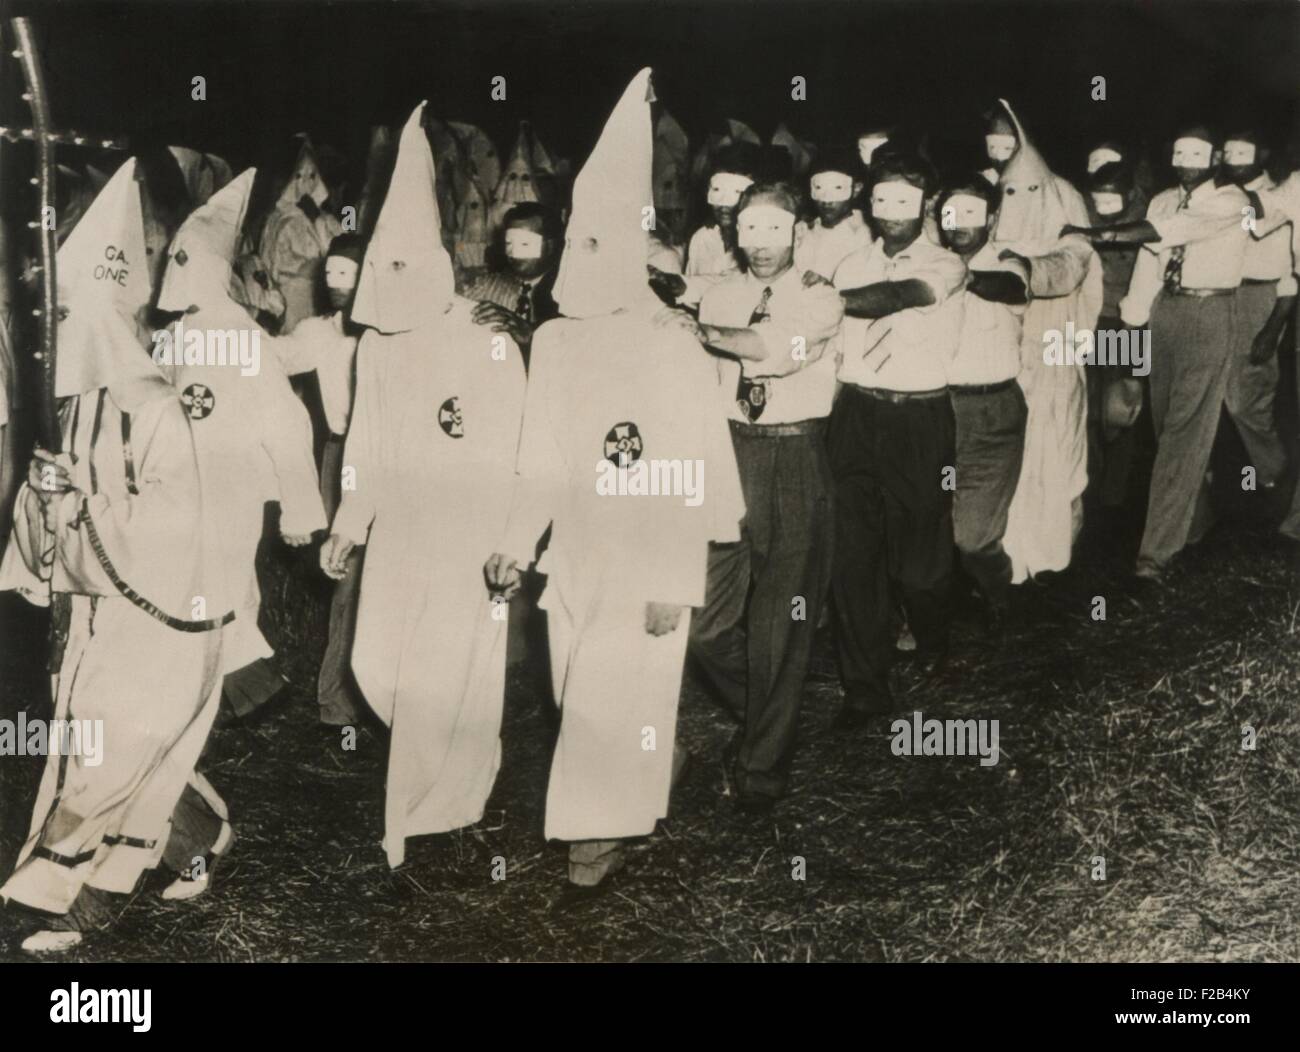 Ku Klux Klan initiation at Stone Mountain near Atlanta, Georgia. June 1949. KKK men in full white masks and gowns lead new members wearing small face masks. - (BSLOC 2015 1 208) Stock Photo